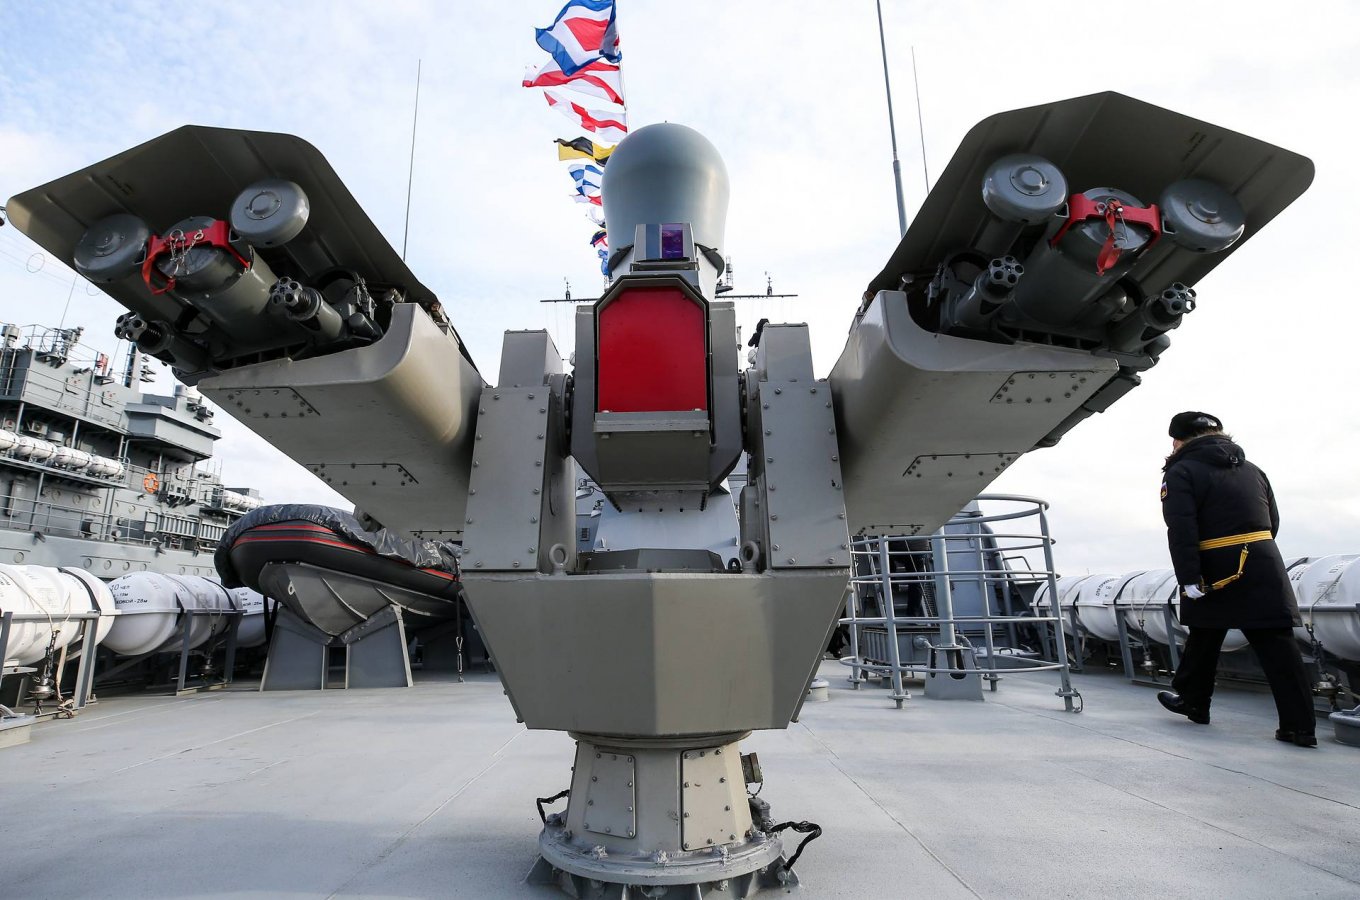 The Hybka air defense system, which is on the ships of project 21631 Buyan-M, in particular on the Grayvoron missile corvette, Grayvoron Is Not Only a Settlement in russia’s Riot-Torn Belgorod Region, But Also a Corvette That Fired Kalibr Missiles at Ukraine, Defense Express